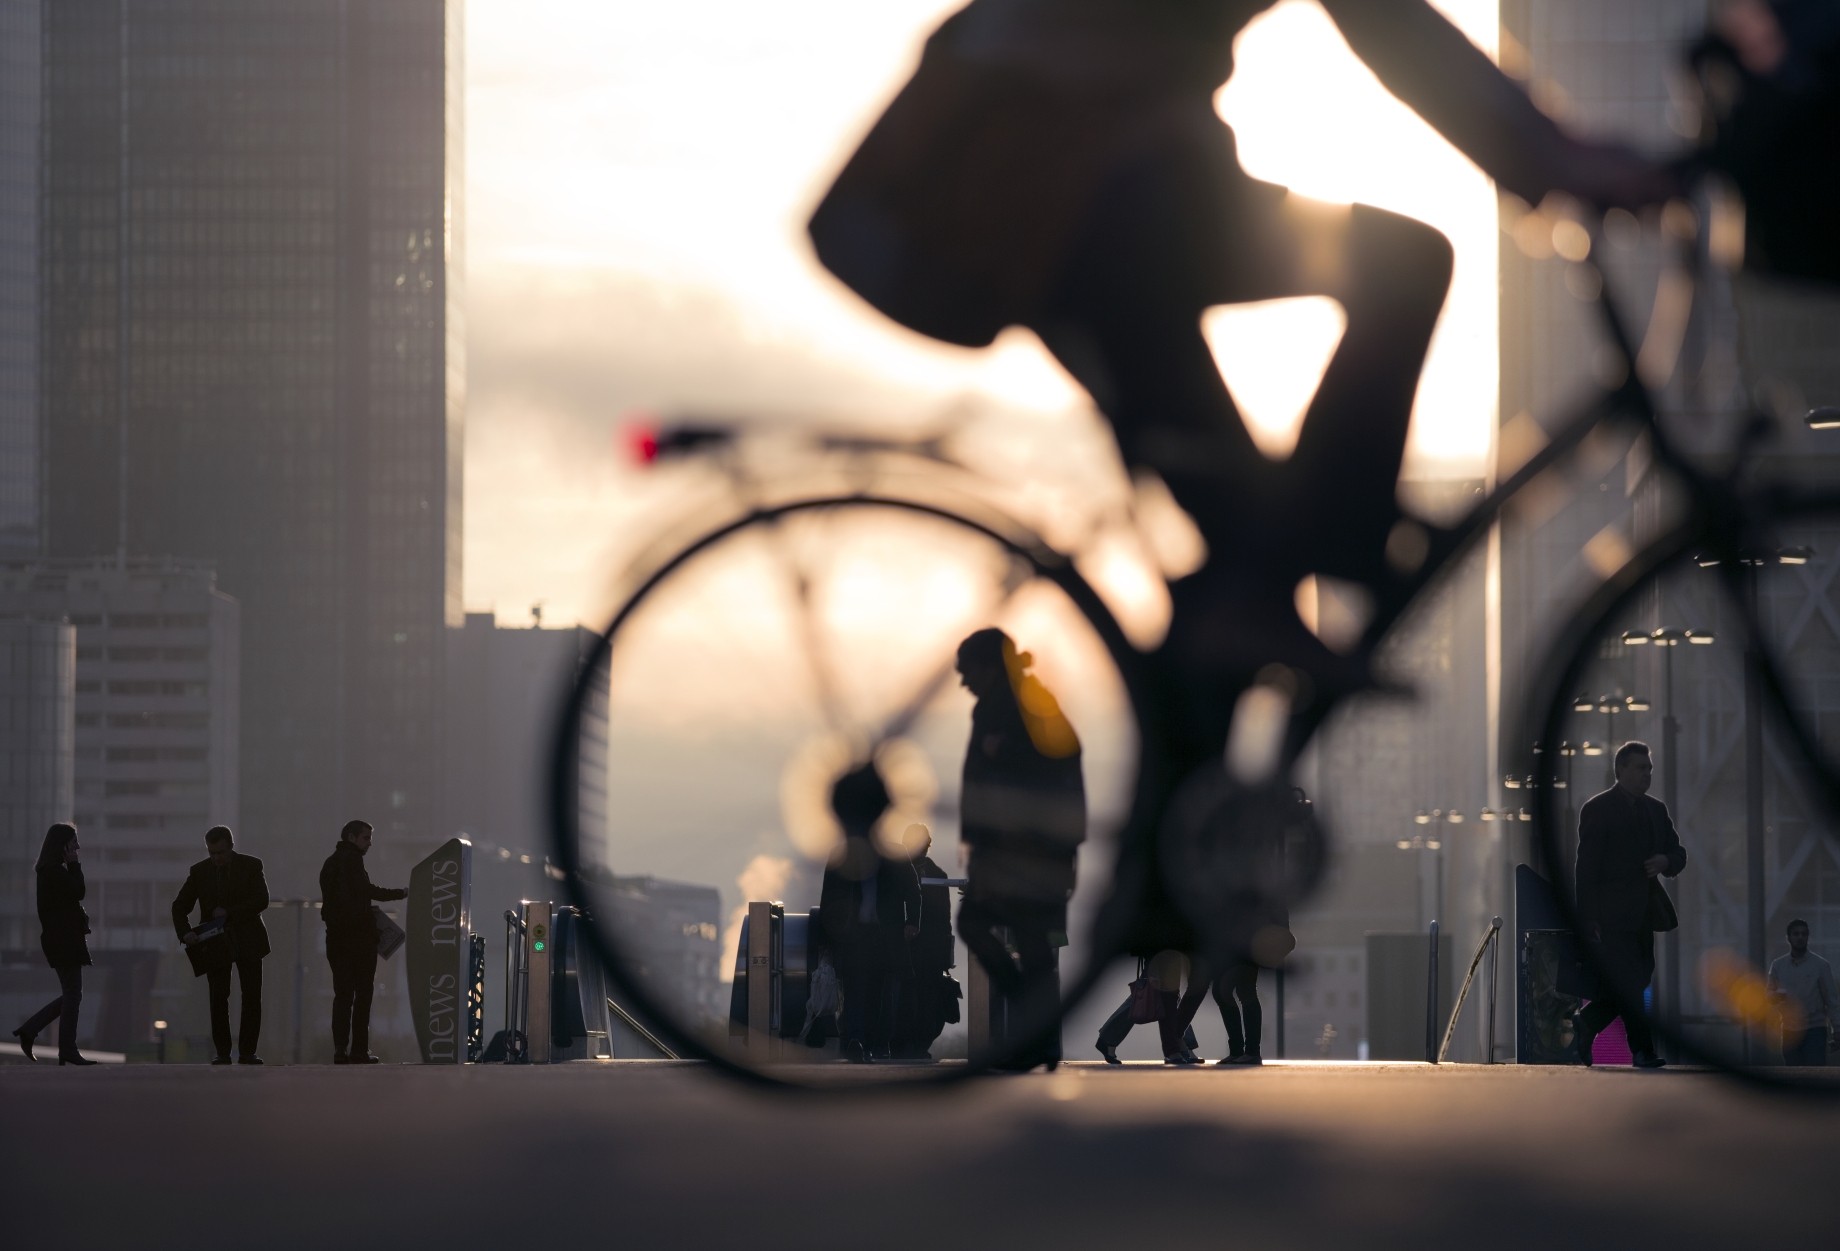 Silhouette of business person on bicycle on busy street